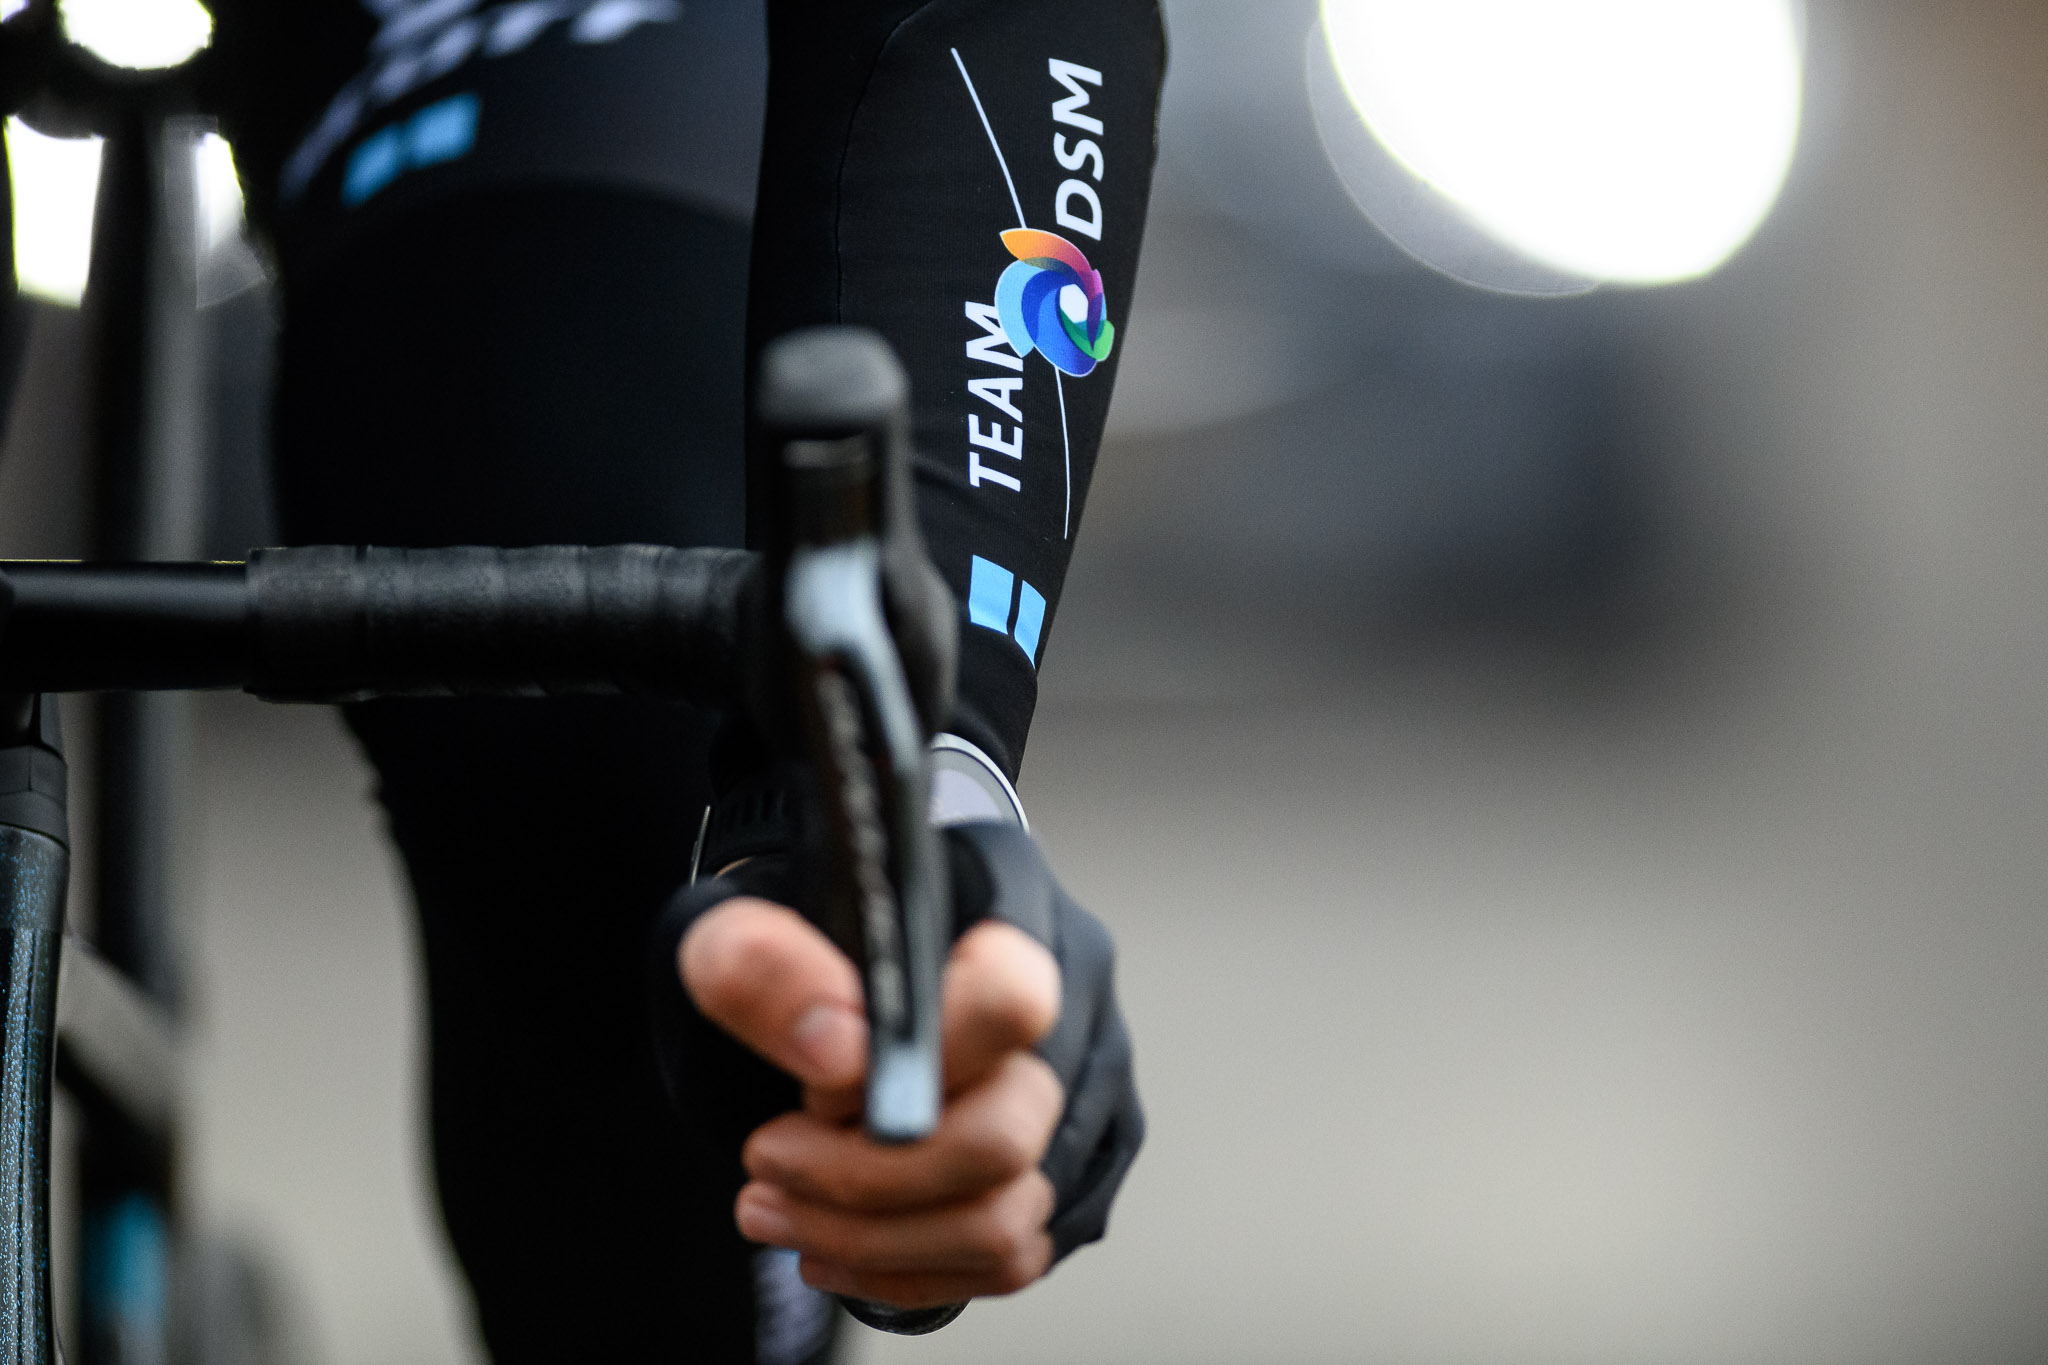 DSM has formed a strategic partnership with a professional cycling team.